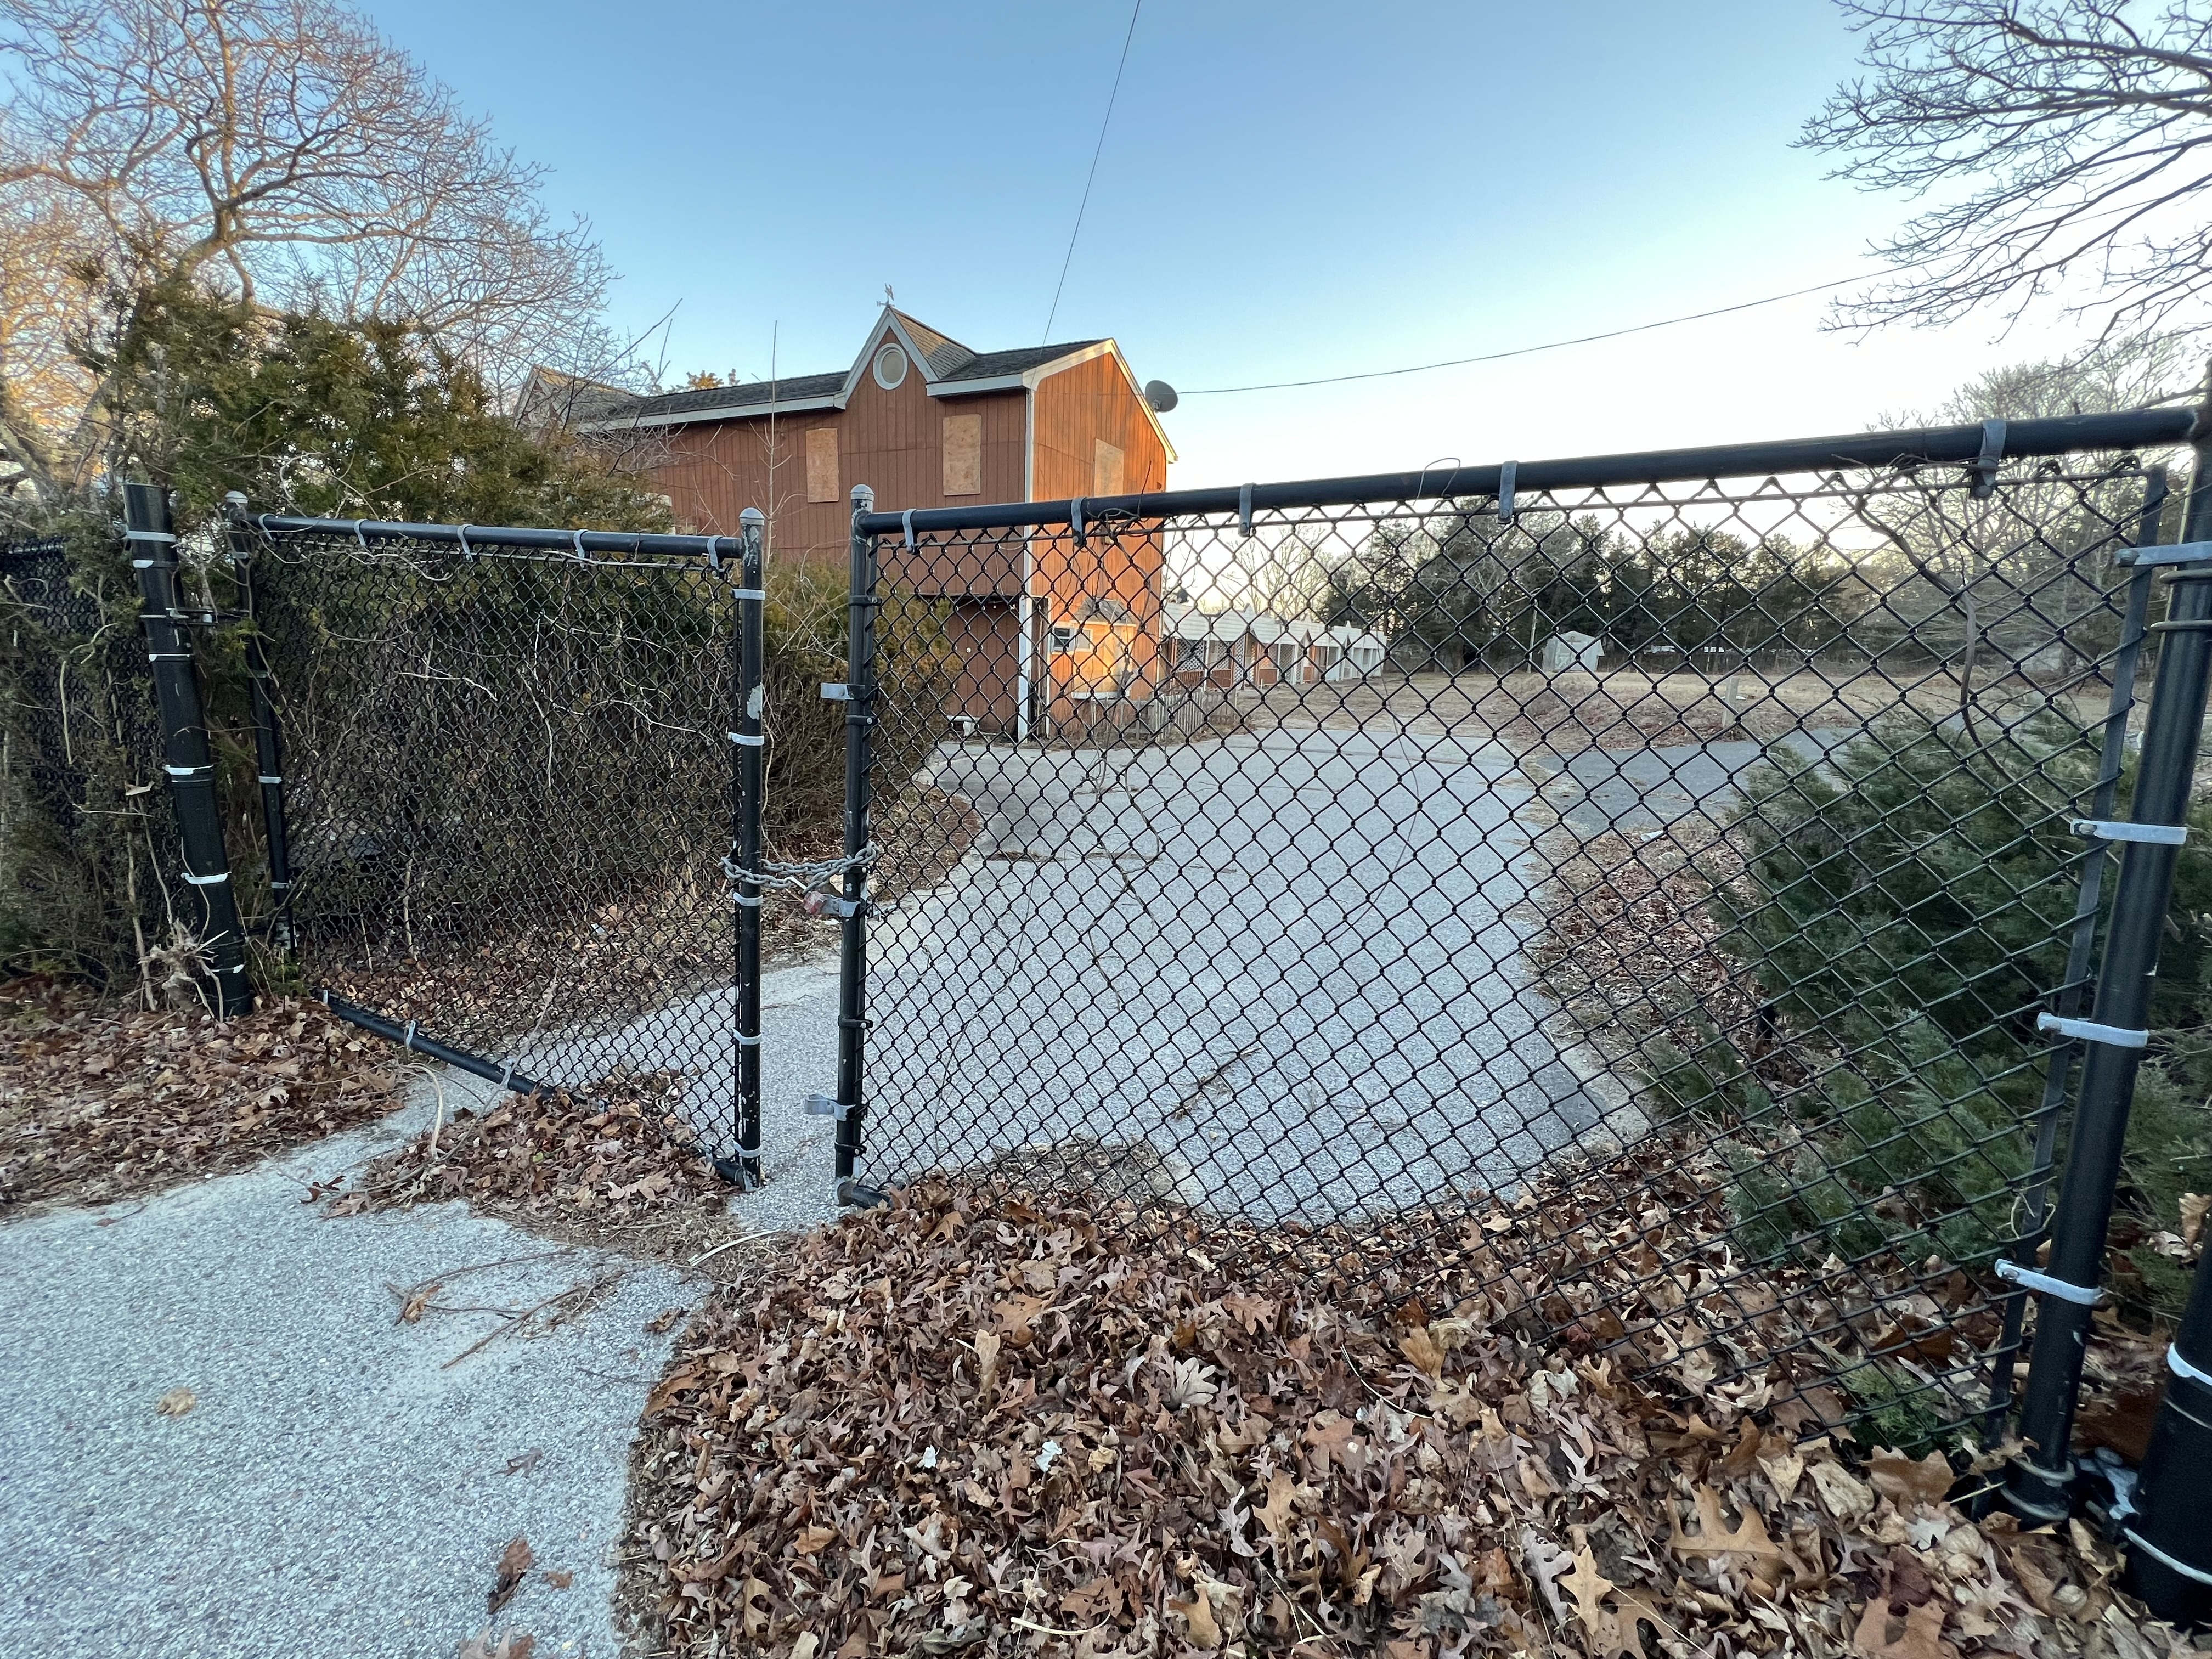 A March 29 hearing on development of the blighted Bel-Aire Cove property in Hampton Bays drew a crowd urging the Southampton Town Board to create a park instead.